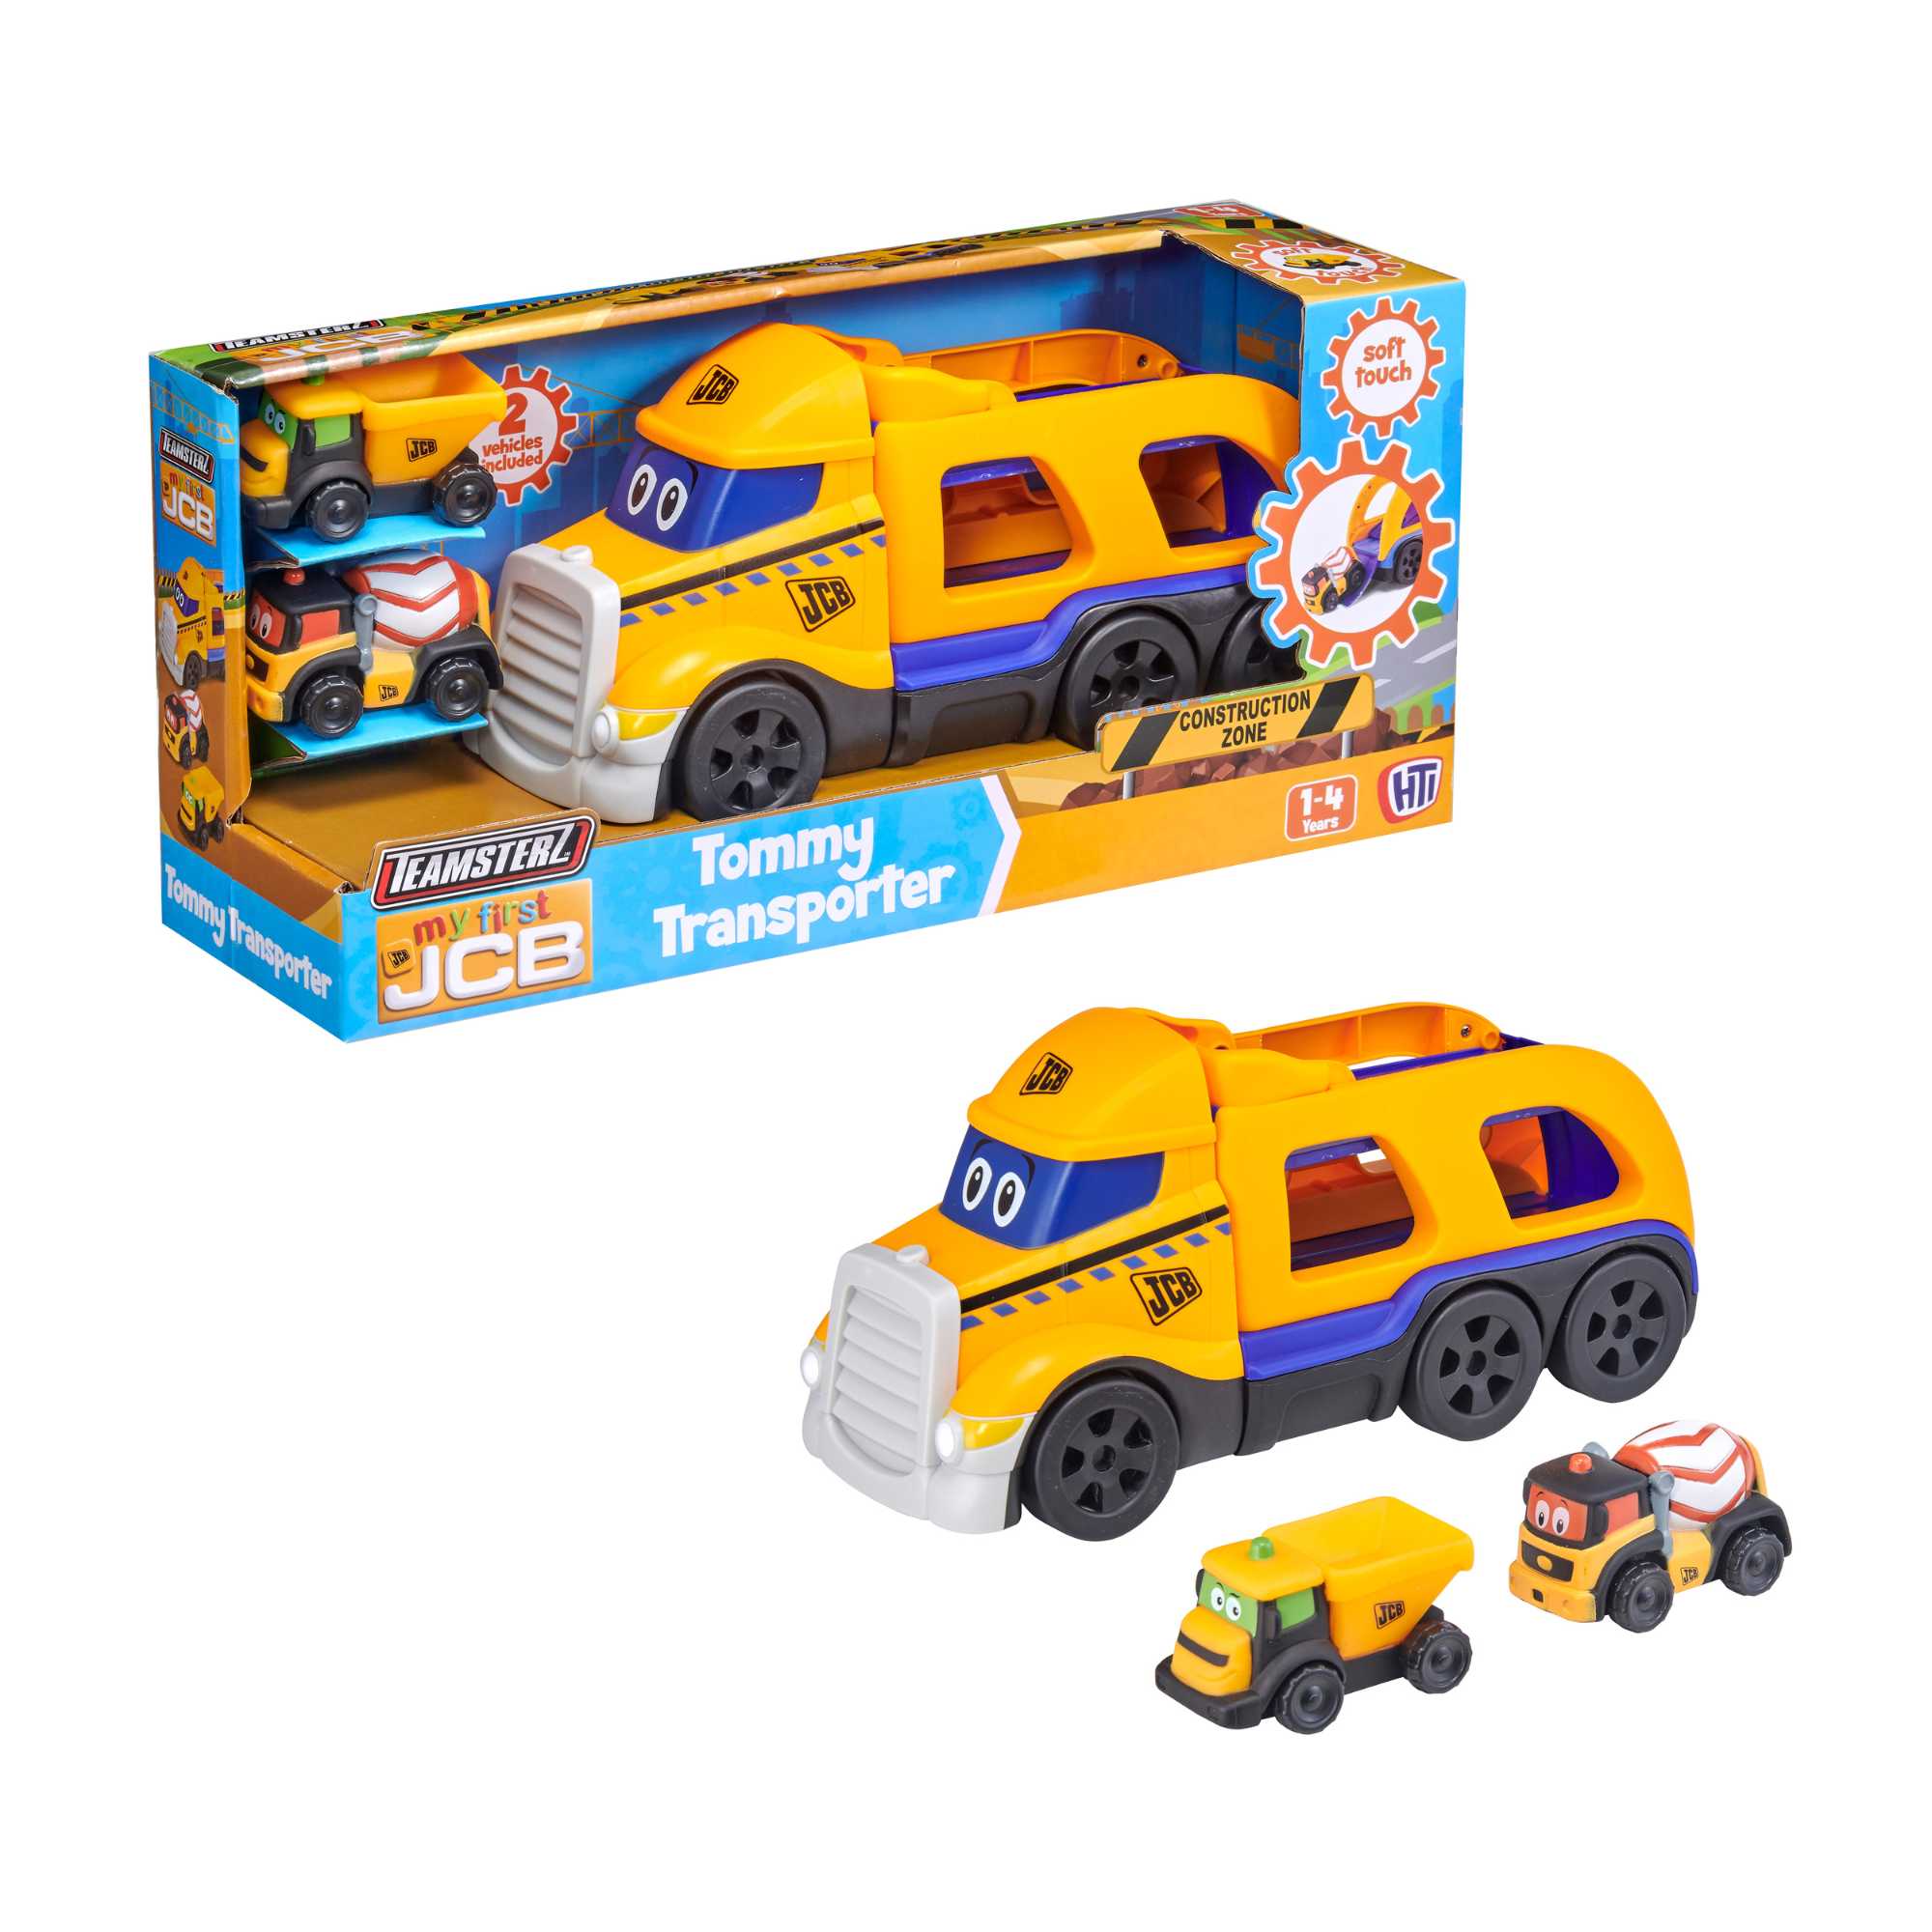 Teamsterz My First JCB Tommy Transporter | Includes 2 Cars